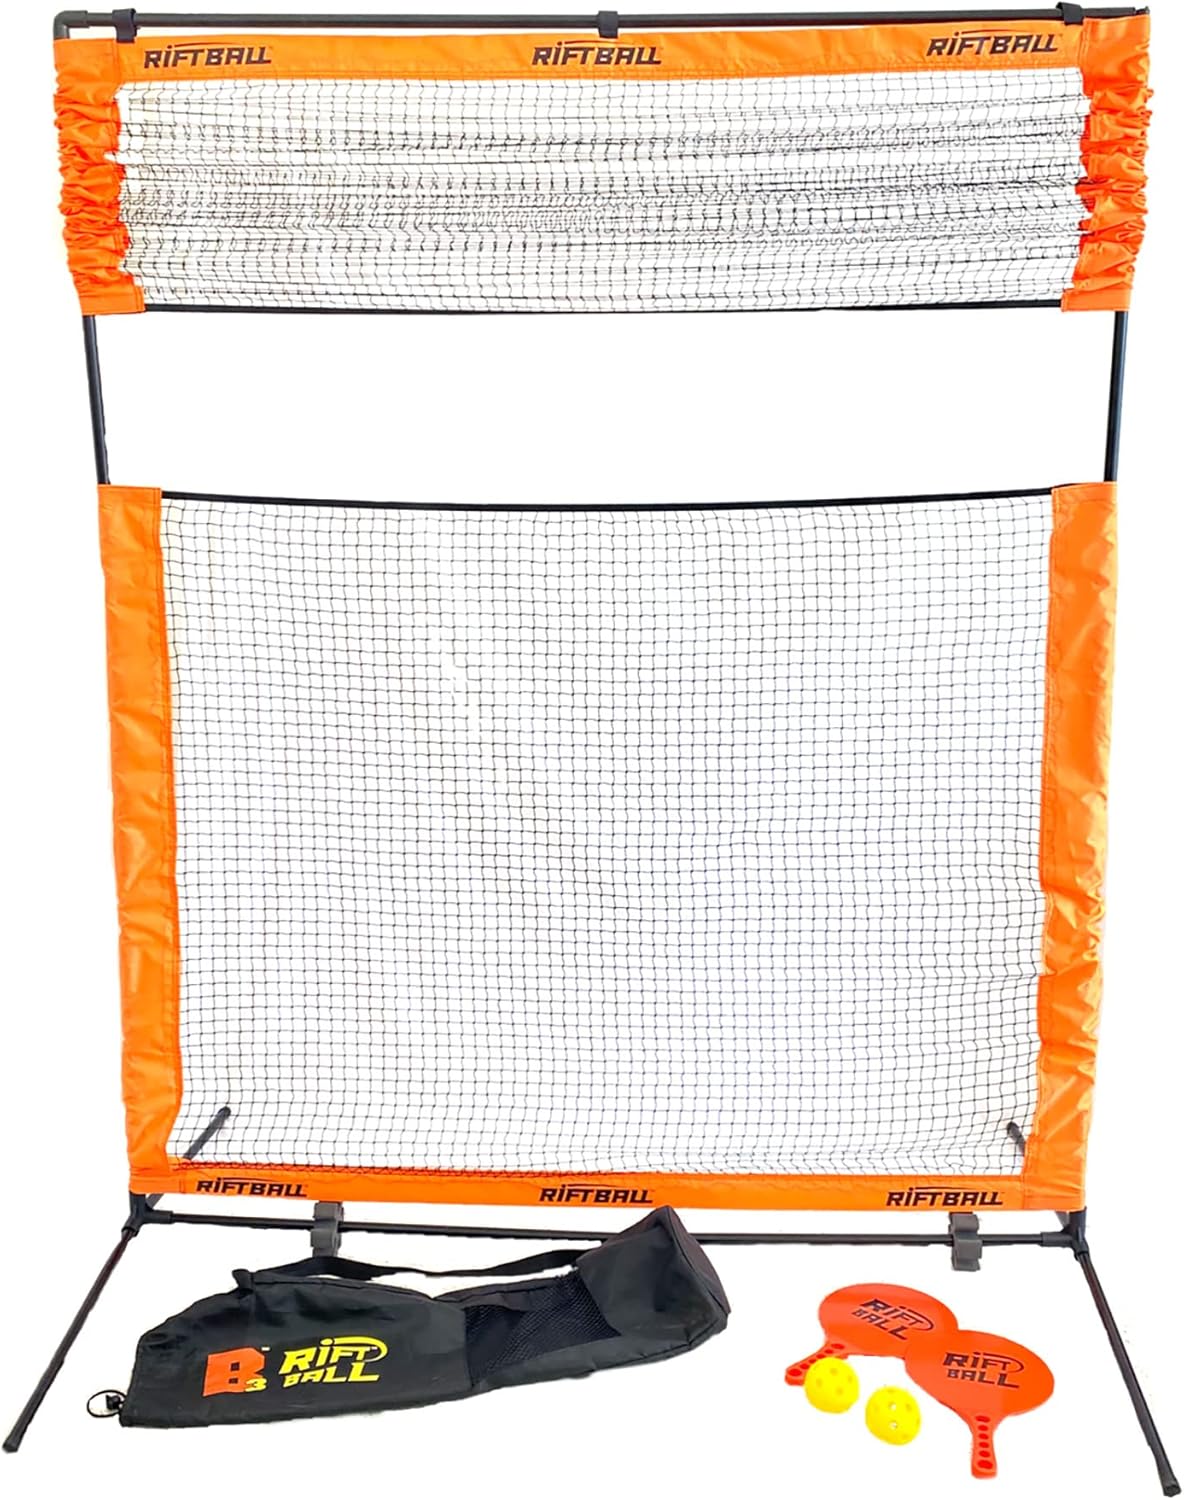 B3 Riftball Paddle Ball Game System - 2 Nets for Twice The Fun! For Adults, kids and family: Beach, Yard, Tailgating, Camping